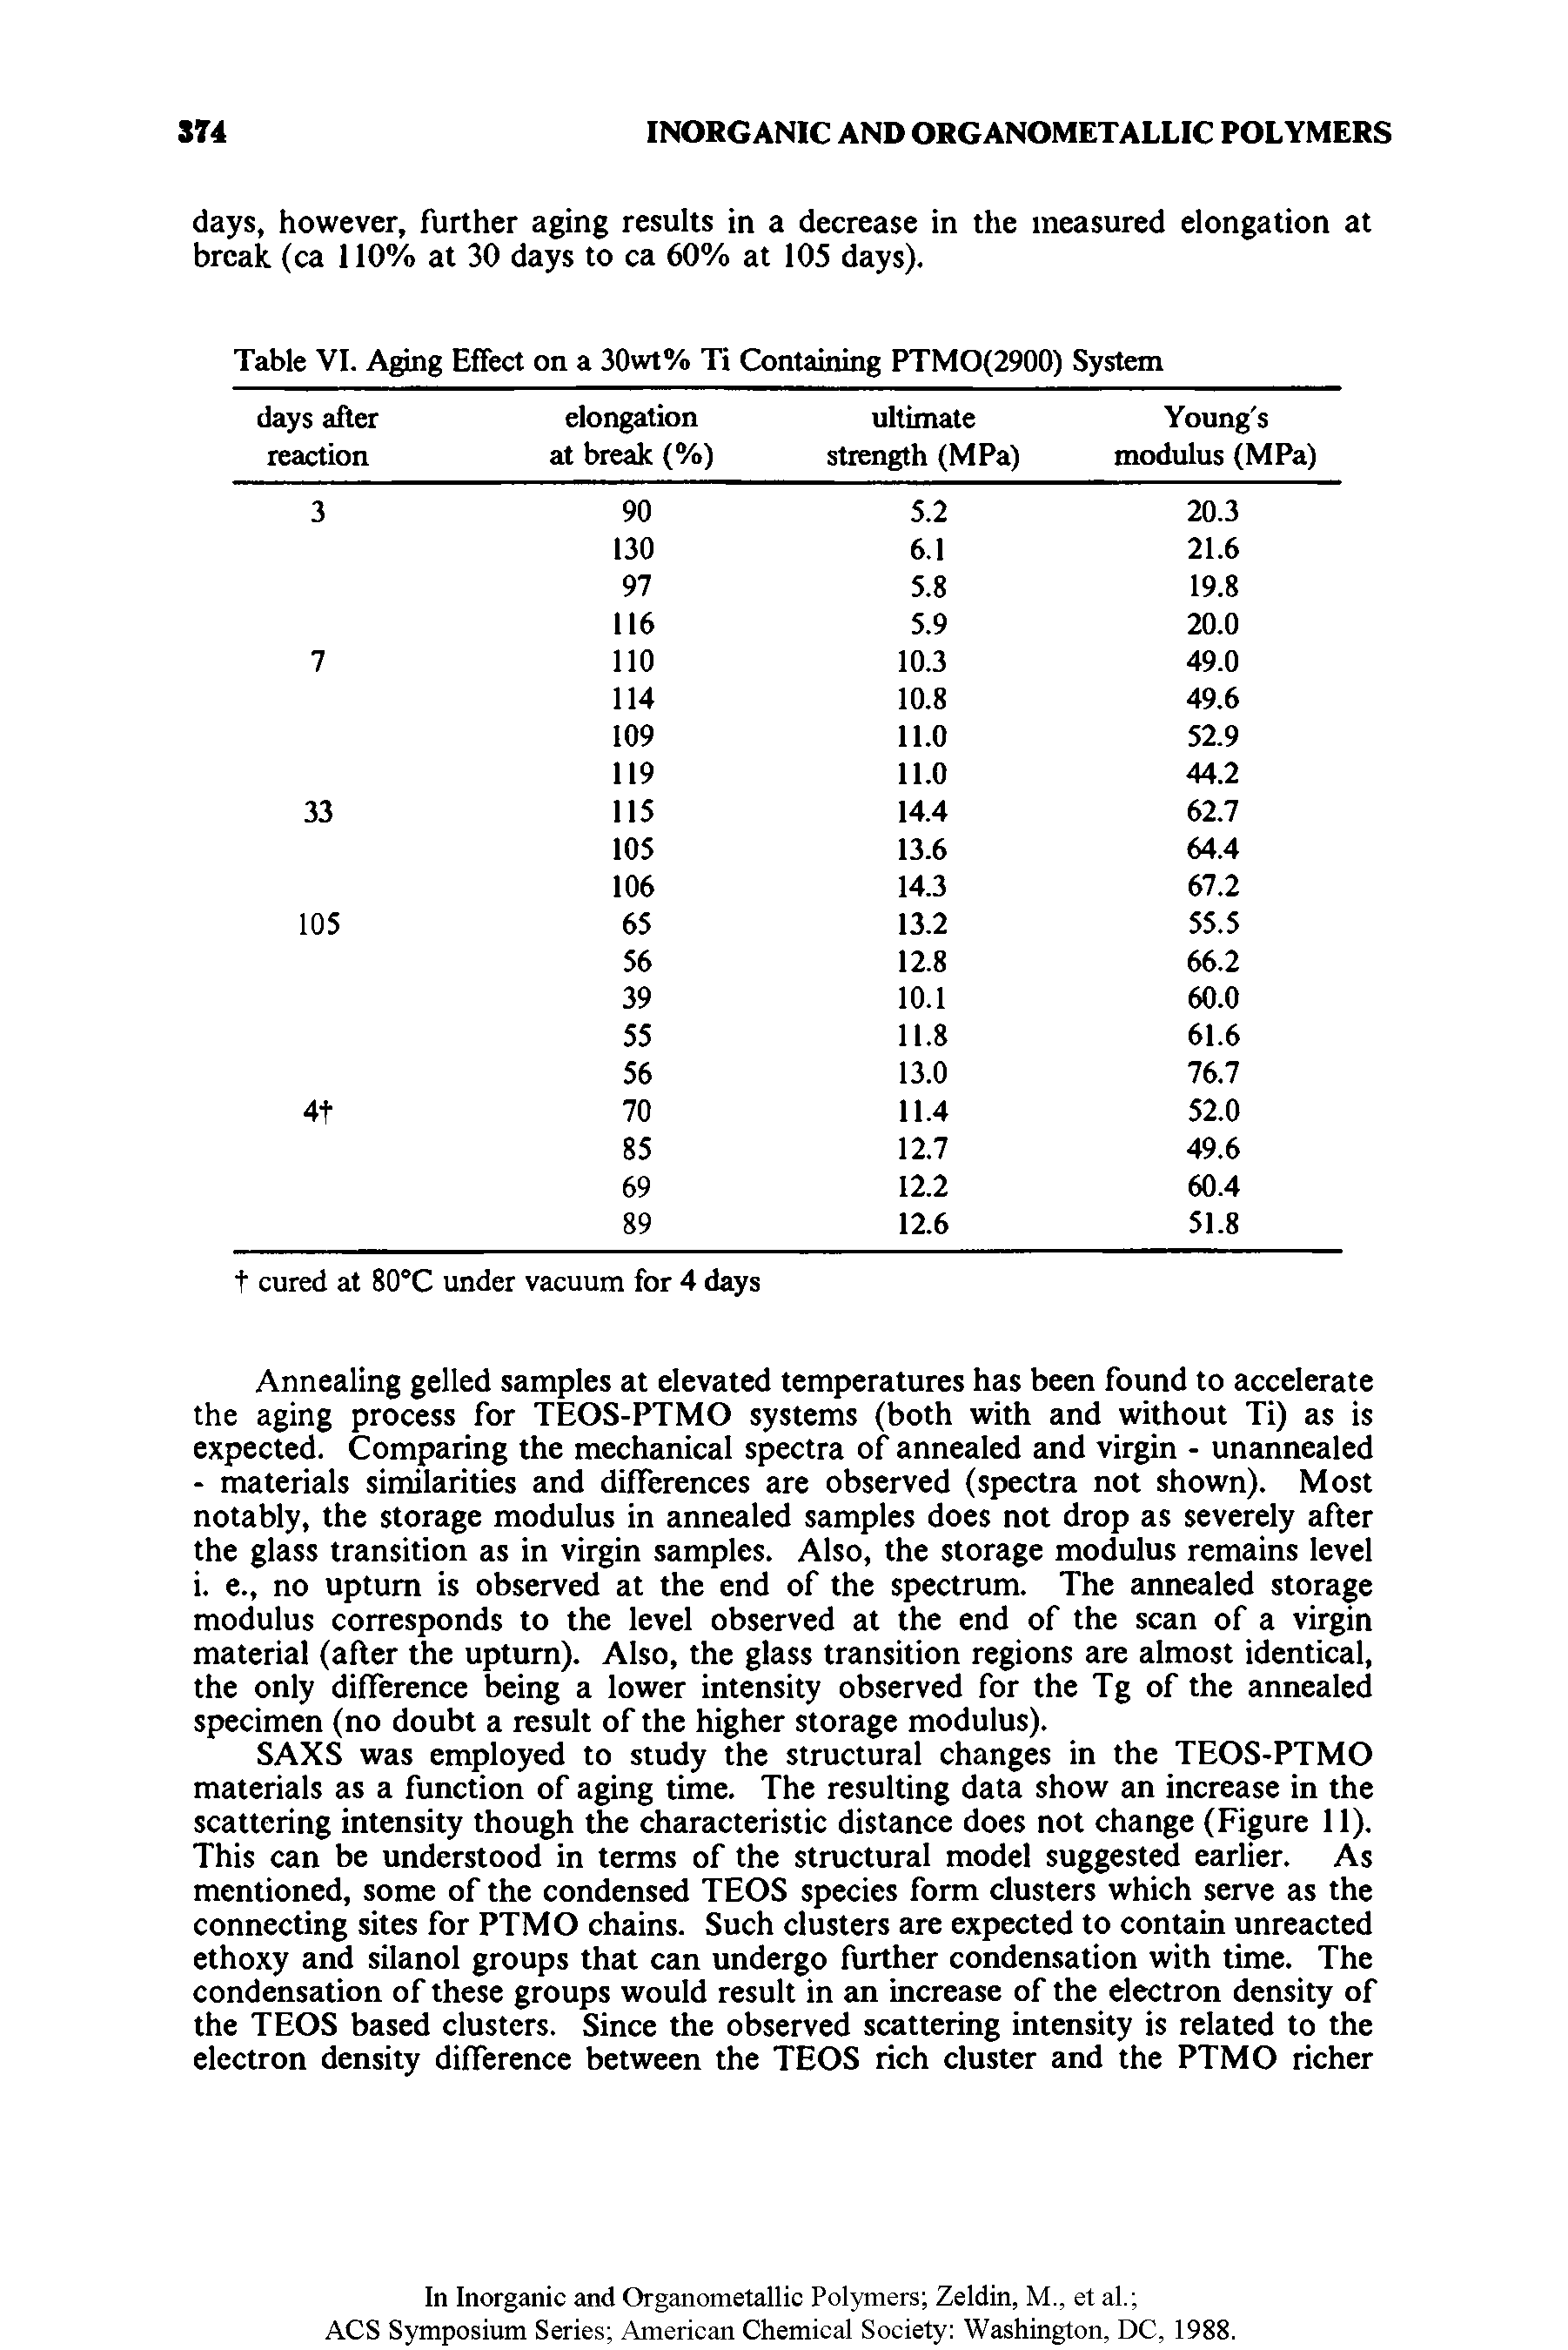 Table VI. Aging Effect on a 30wt% Ti Containing PTMO(2900) System...